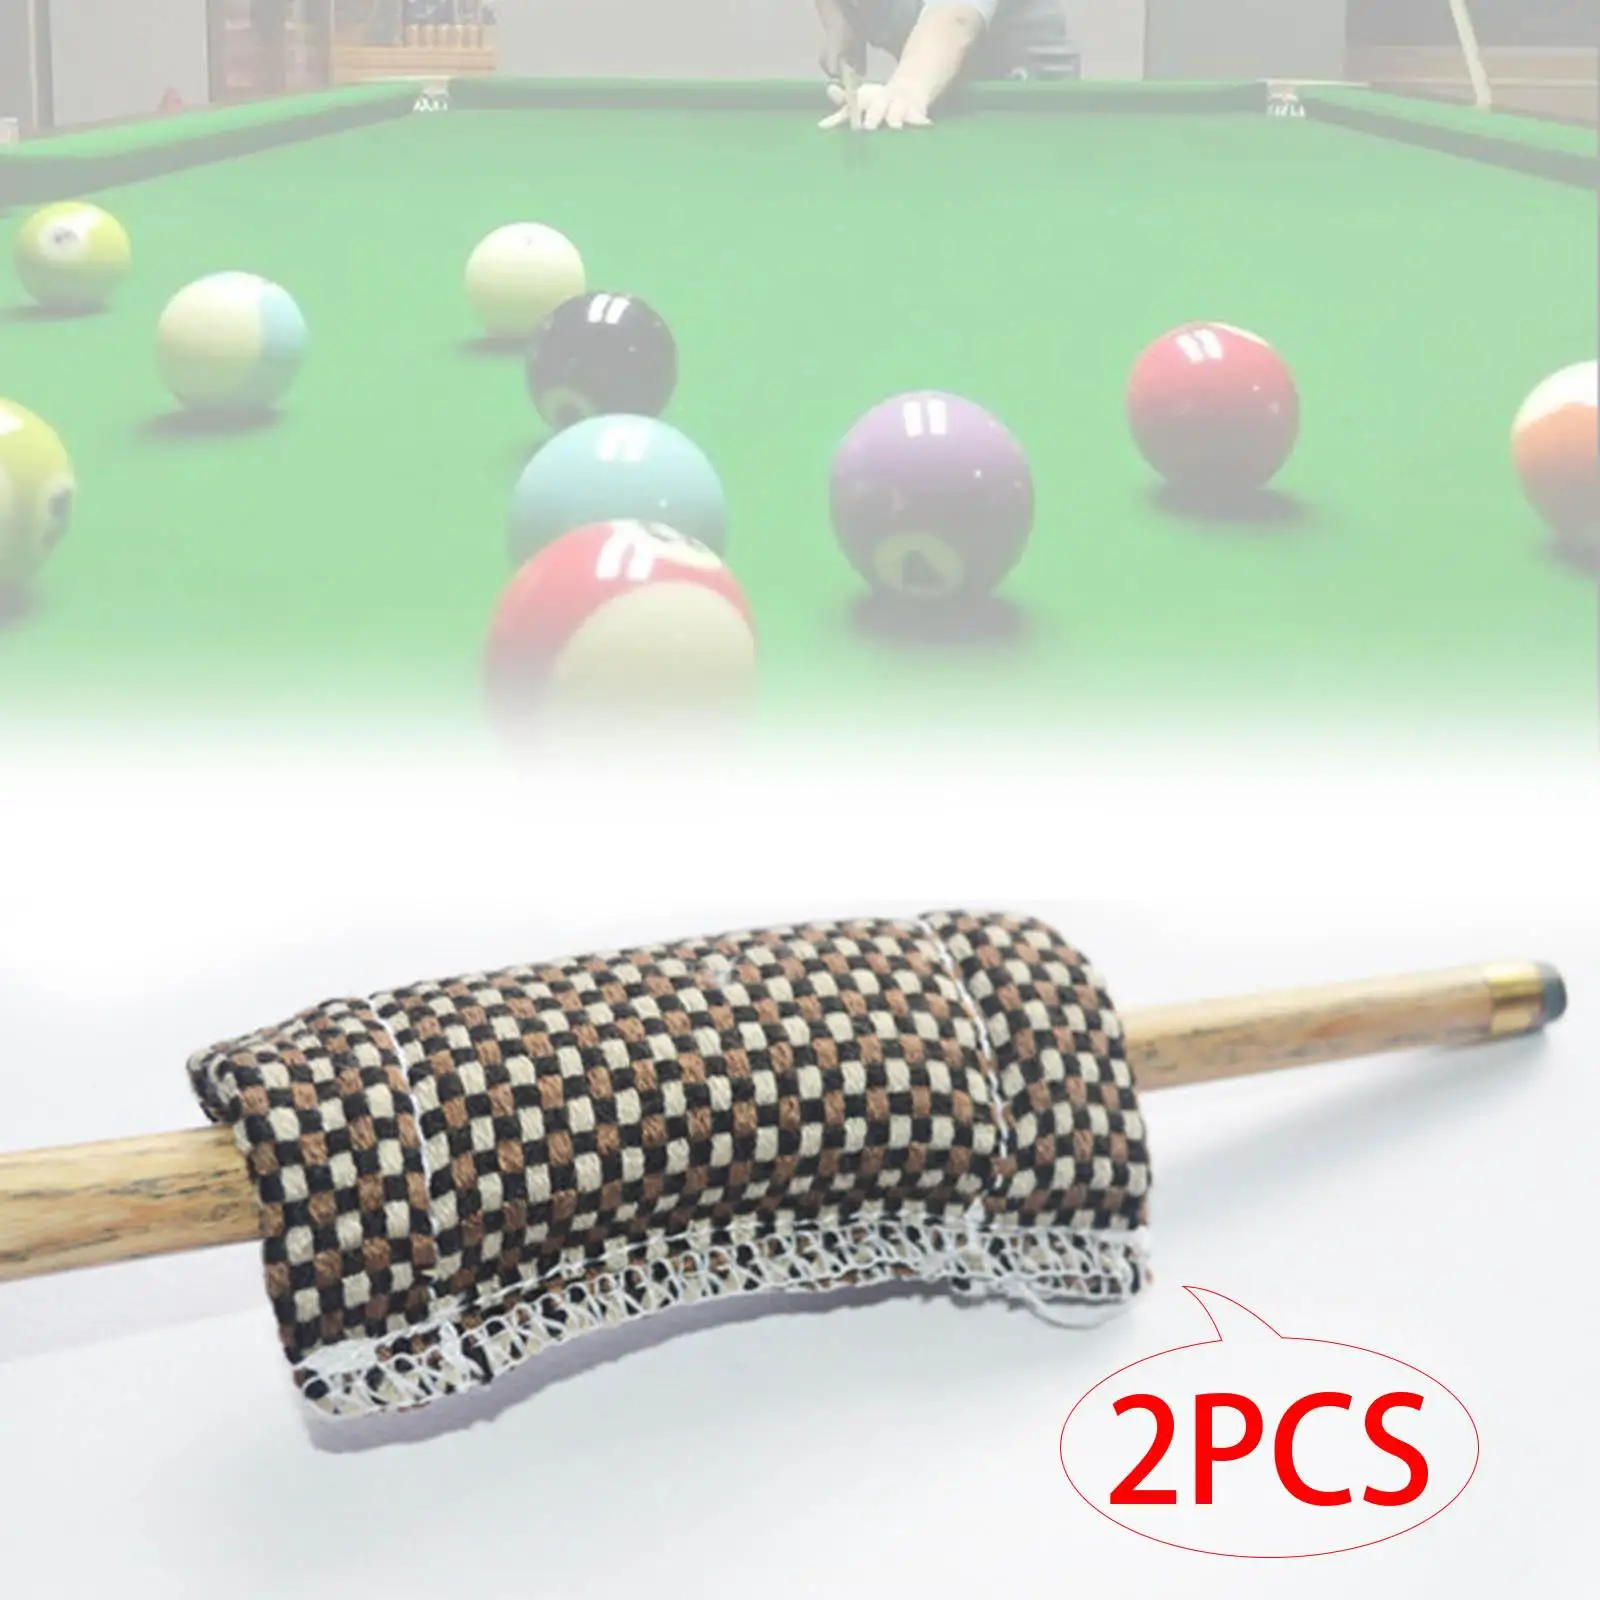 2Pcs Billiards Snooker Pool  Cleaning Cloth Shaft Polisher Burnisher Soft Convenient Cloth Towel Pool Table Accessories